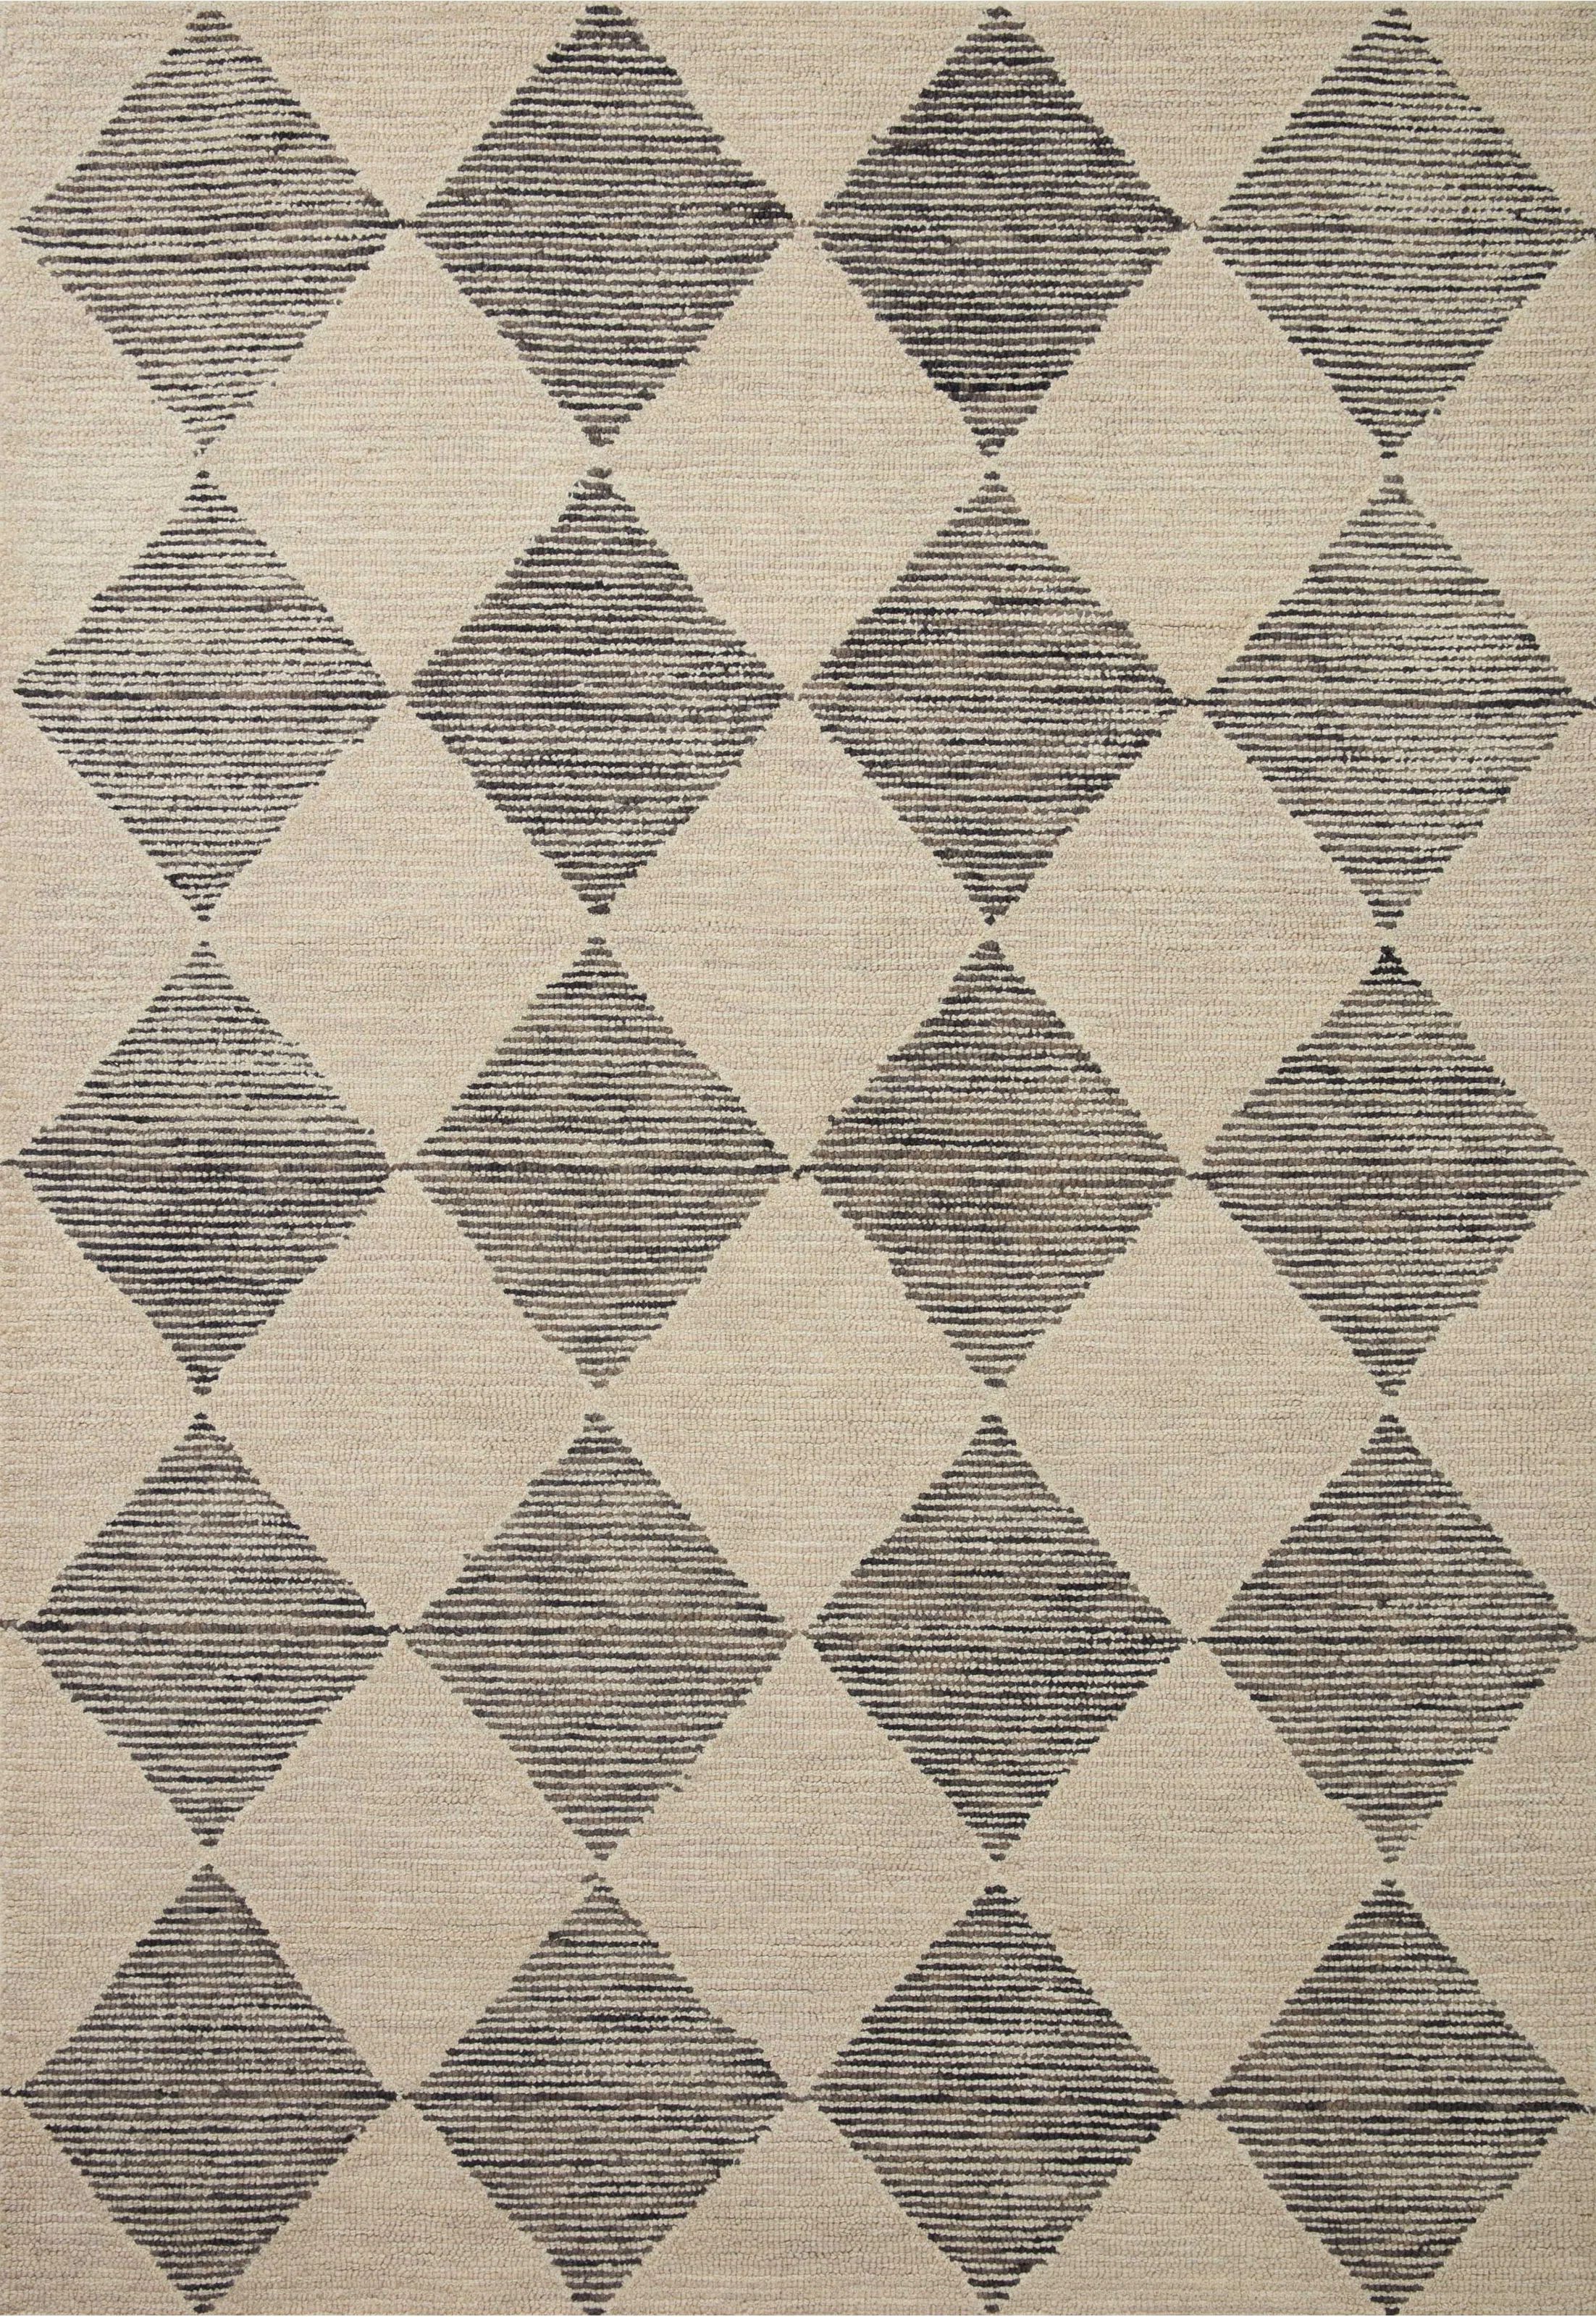 Chris Loves Julia x Loloi Francis Collection FRA-01 Beige / Charcoal, Contemporary  Area Rug | Wayfair Professional